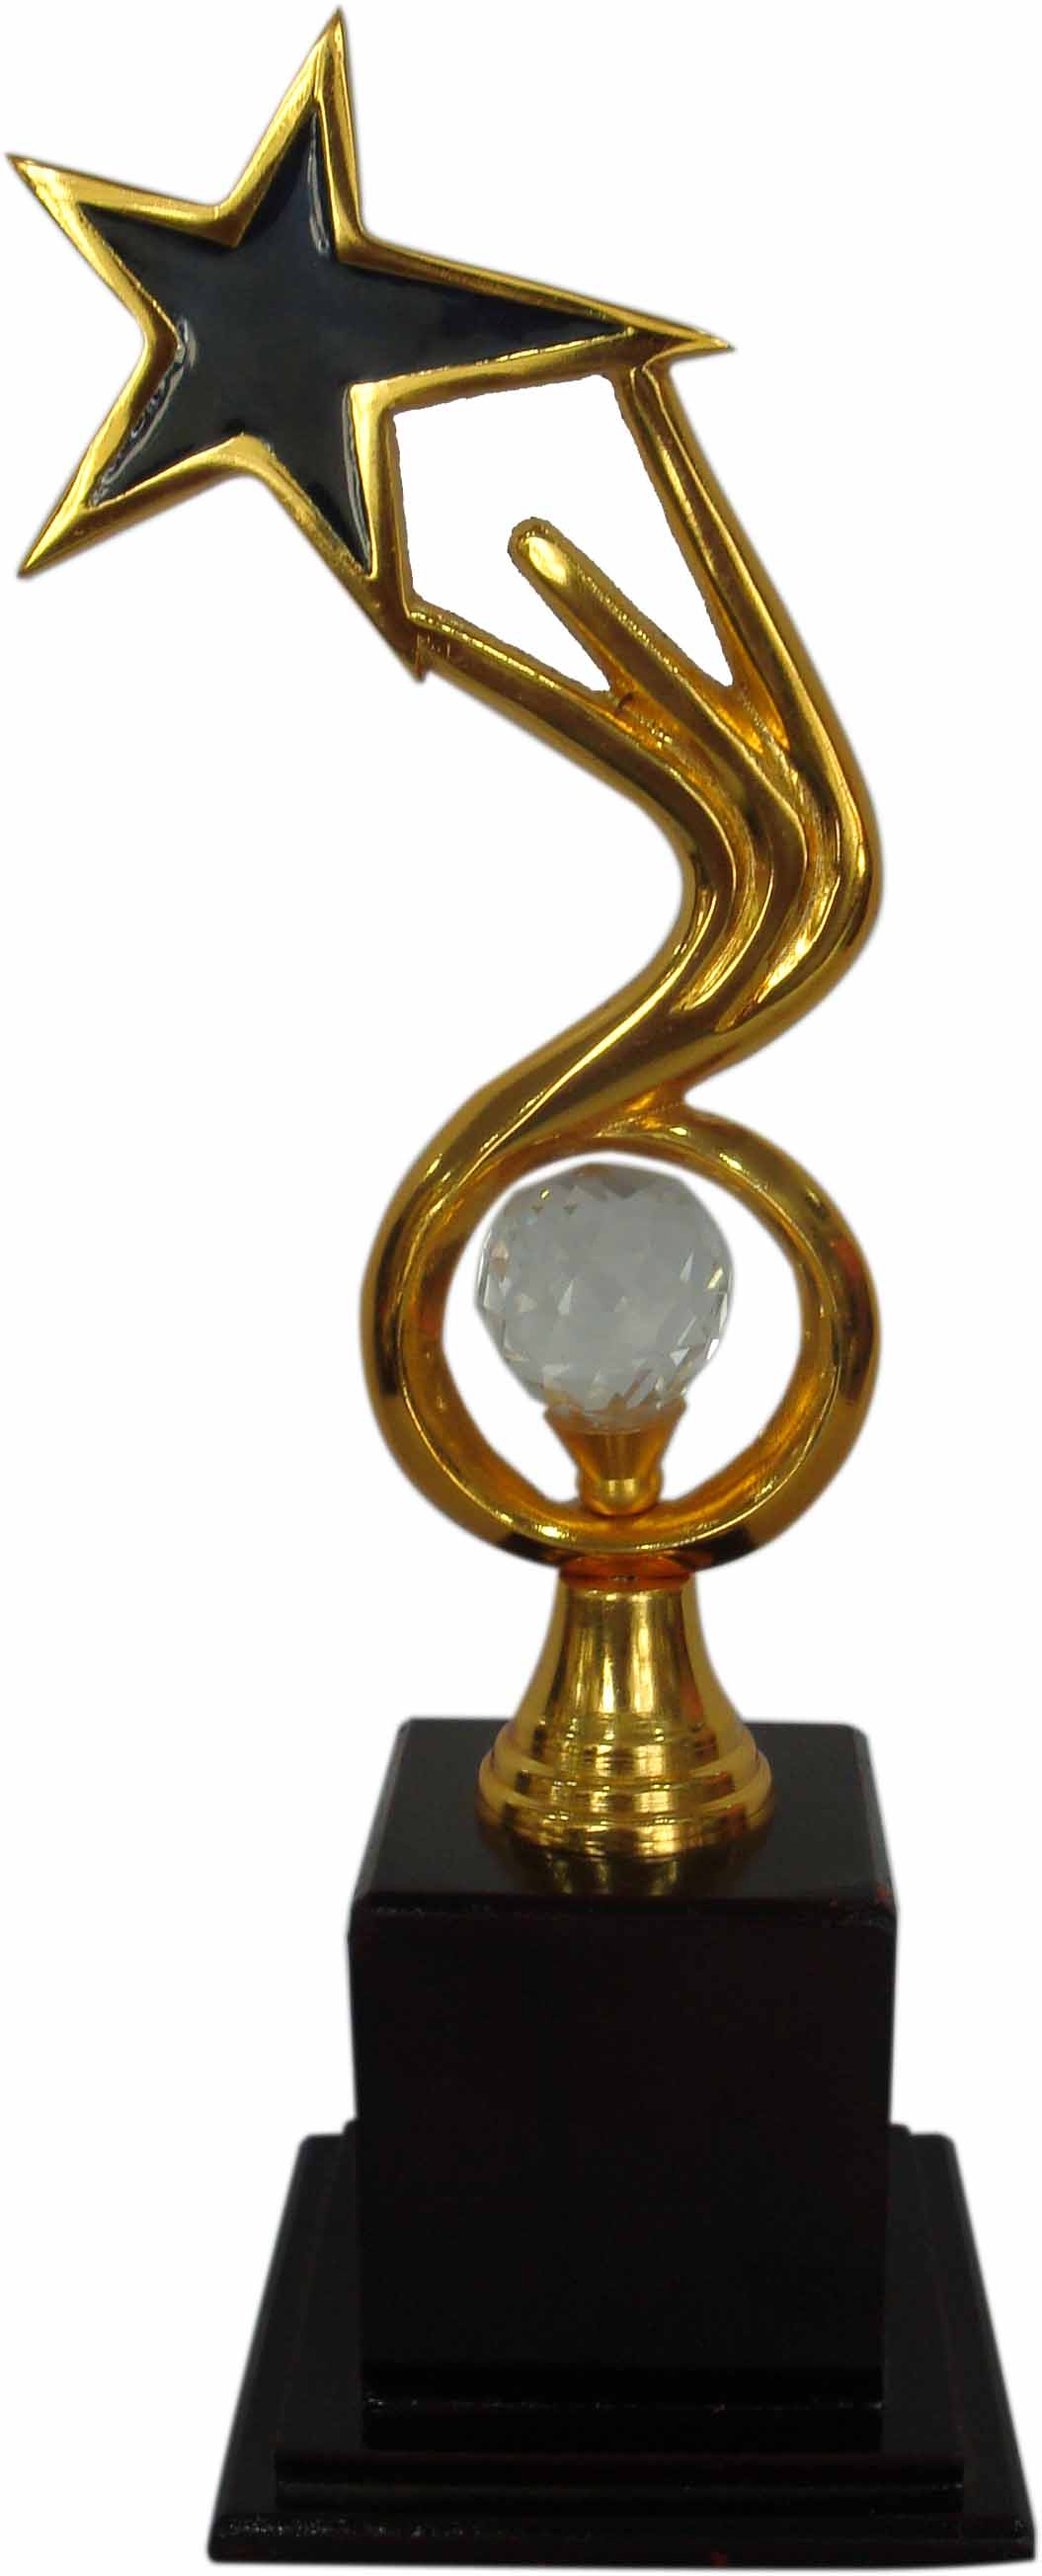 METAL-168 | Prize Land | METAL TROPHY MANUFACTURE IN CHANDIGARH  - GLK2300